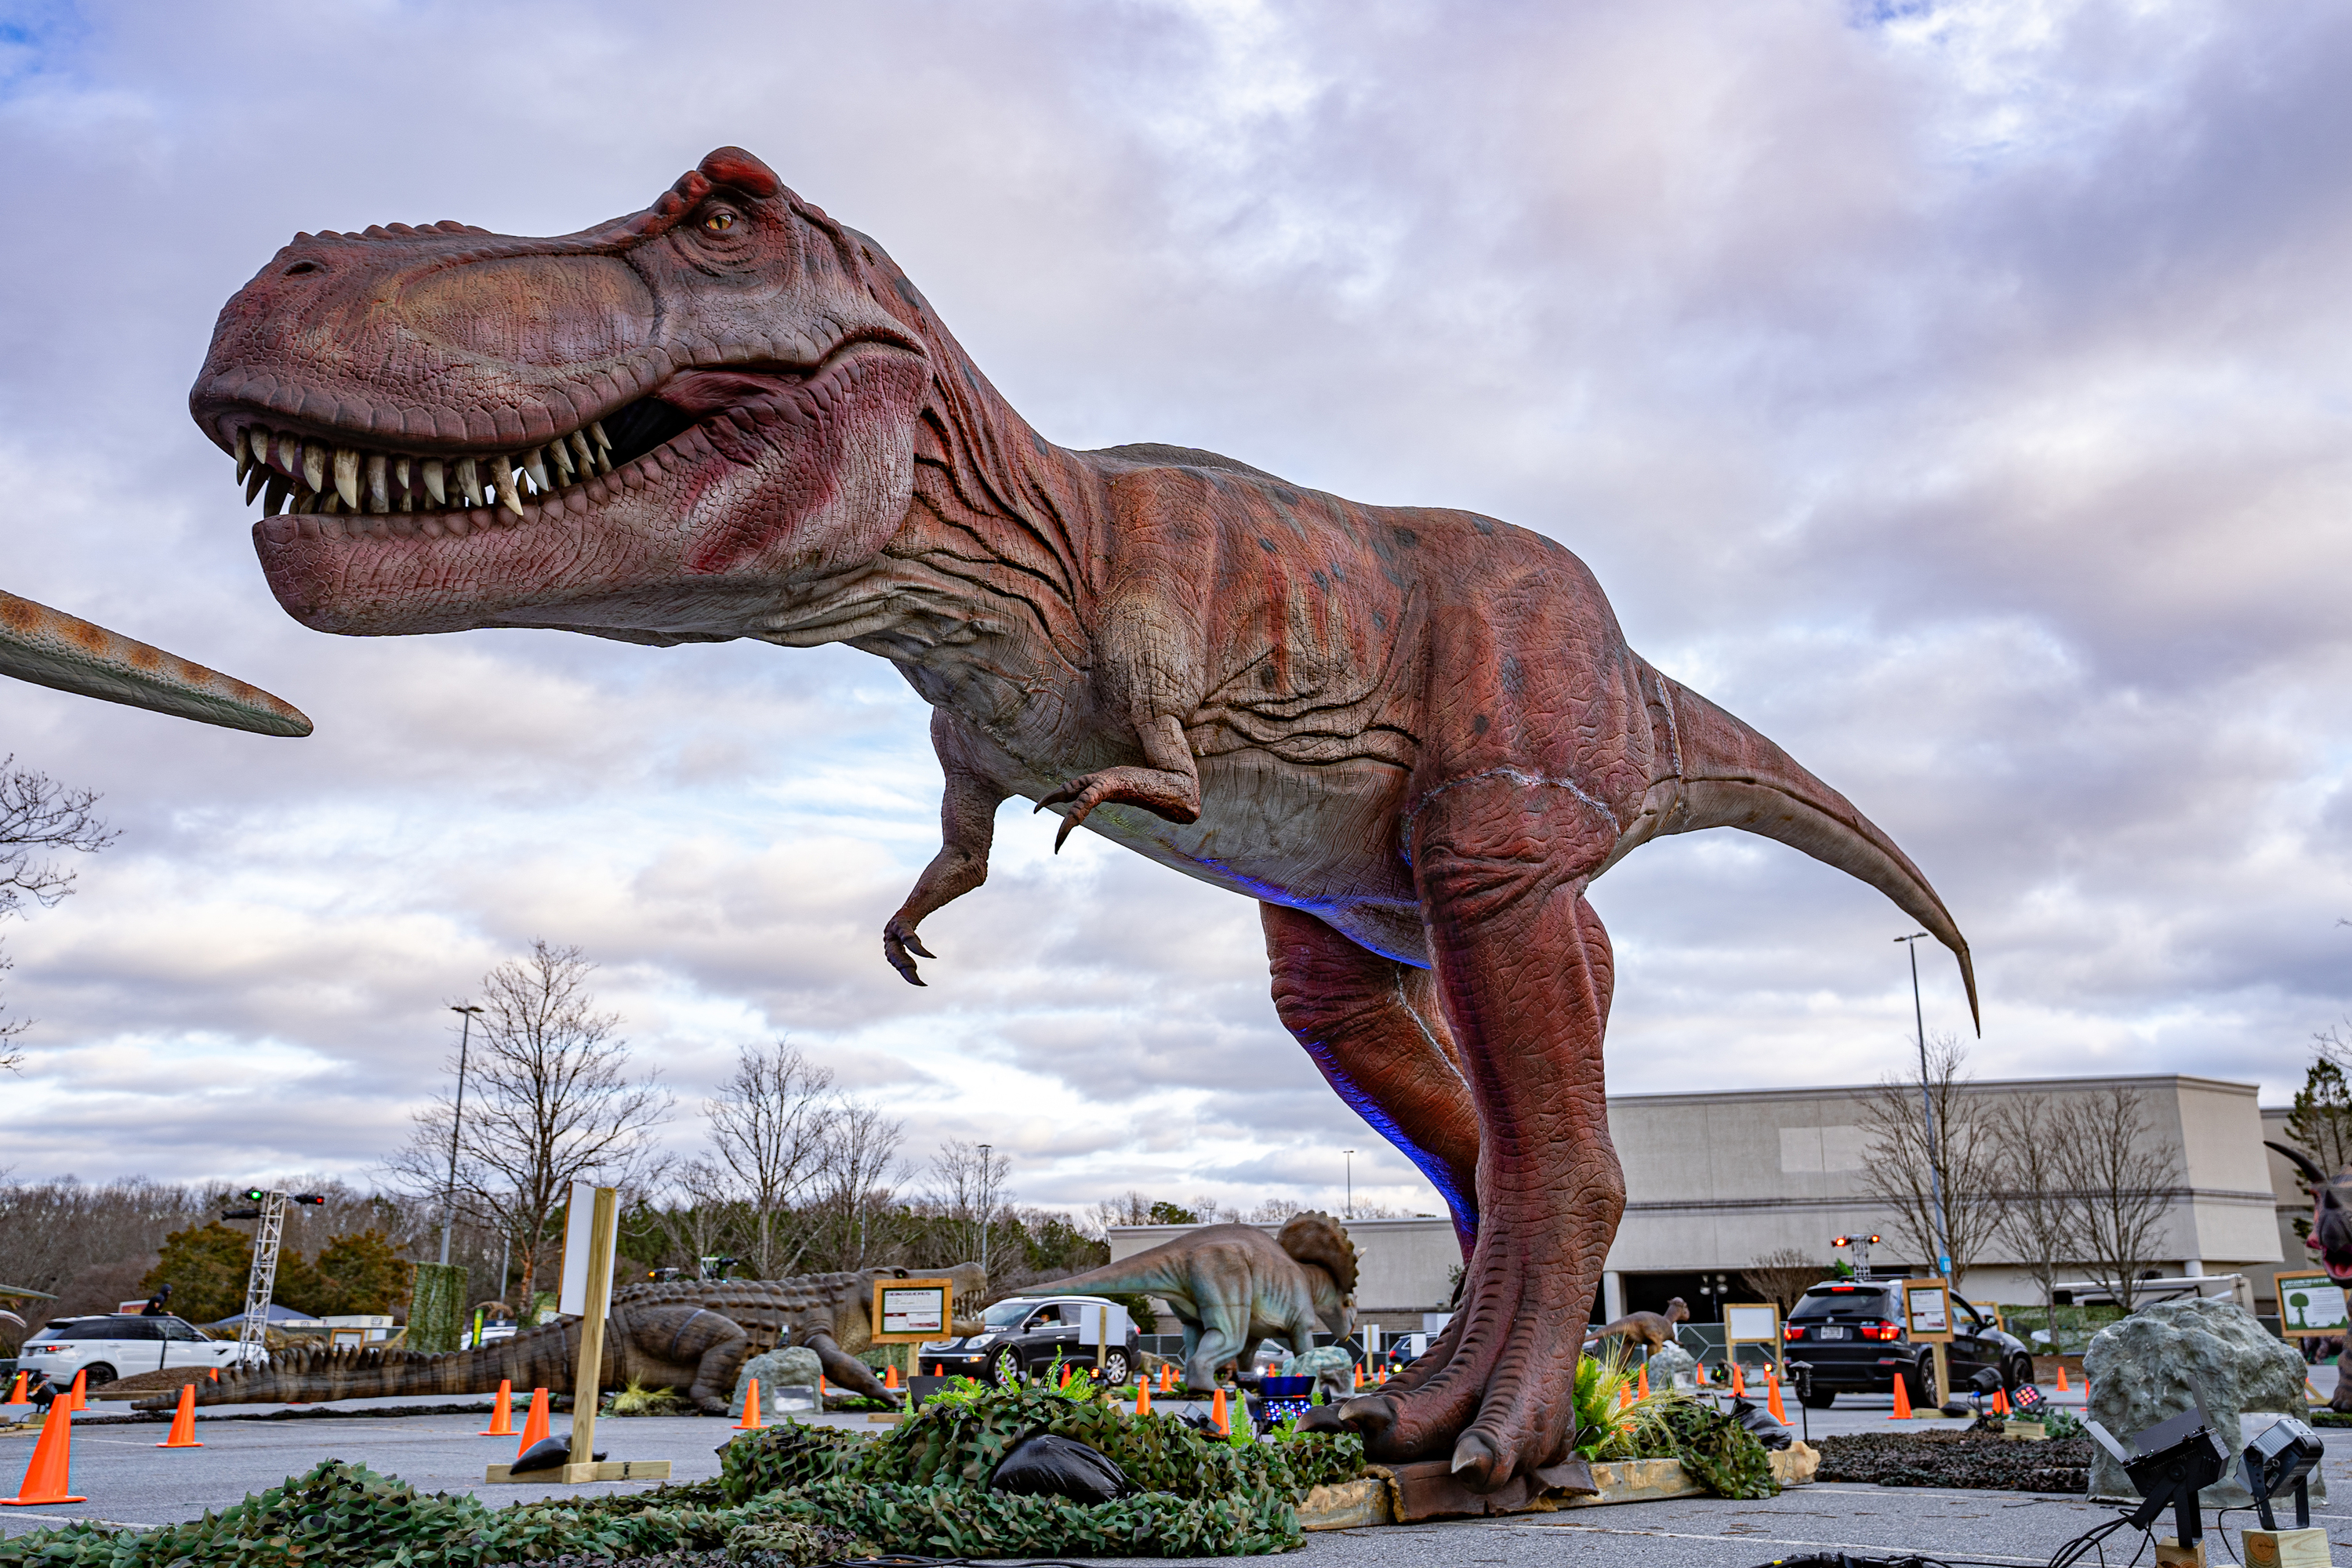 A Drive Thru Dinosaur Safari Is Coming To The Chicago Area